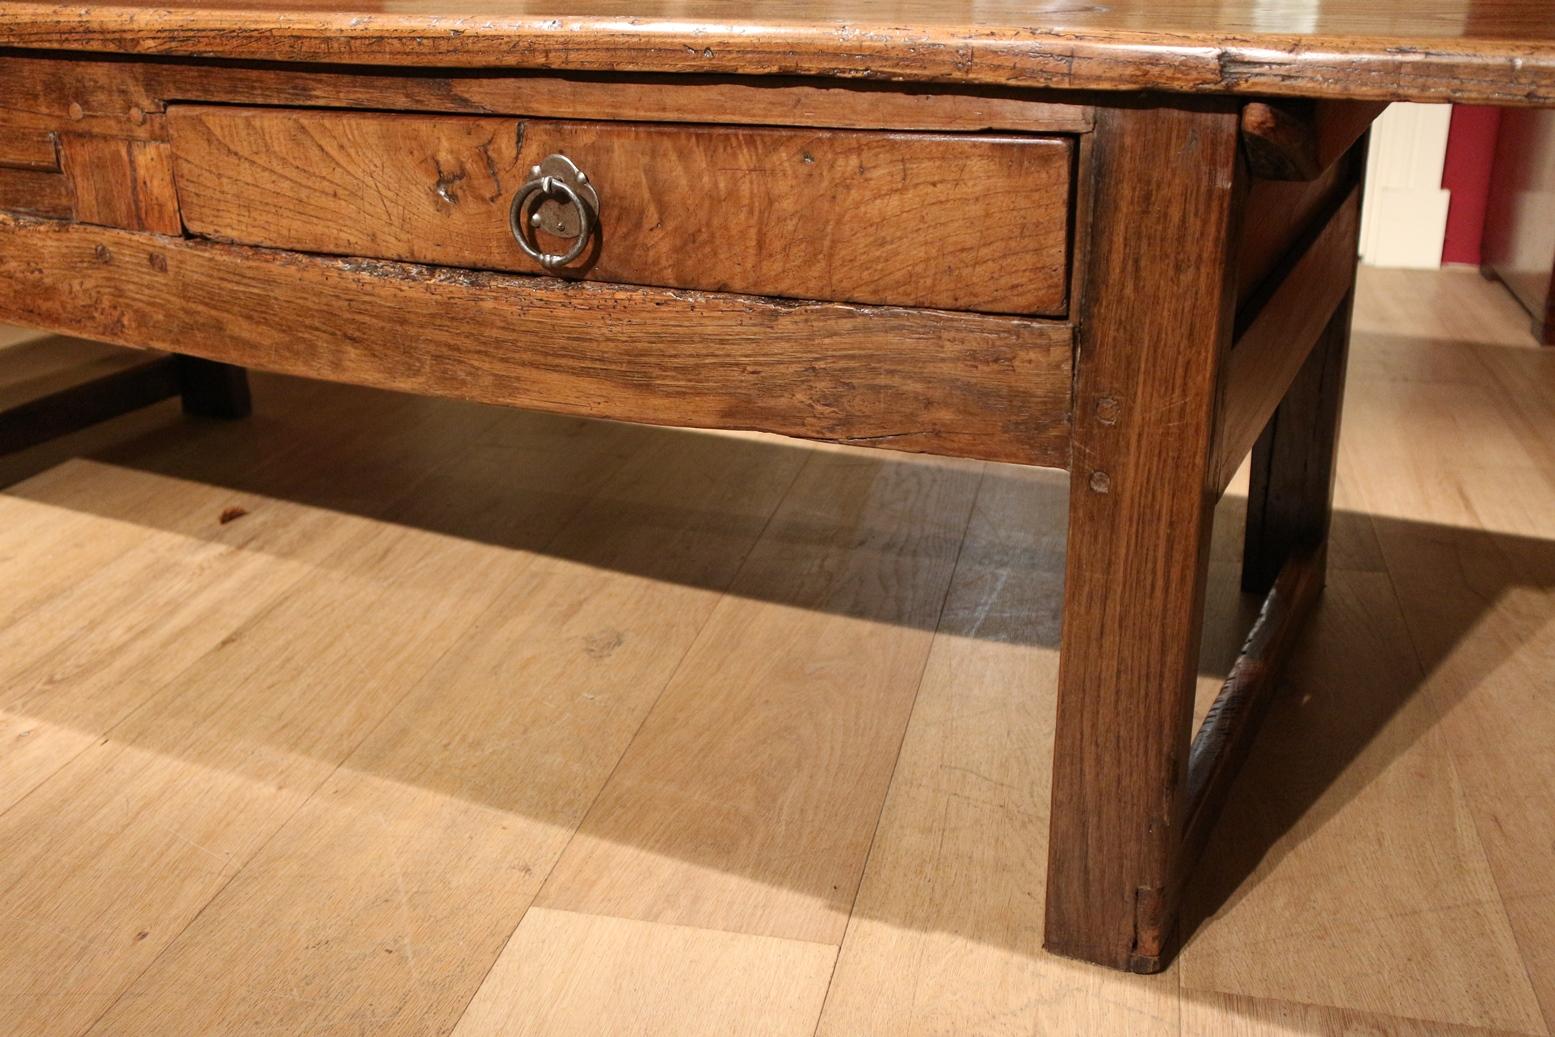 Beautifully 18th century chestnut wood coffee table with 2 drawers in perfect condition. Drawer bottoms have been replaced
Origin: France
Period: 18th century
Size: 178 cm x 63 cm x 50 cm.